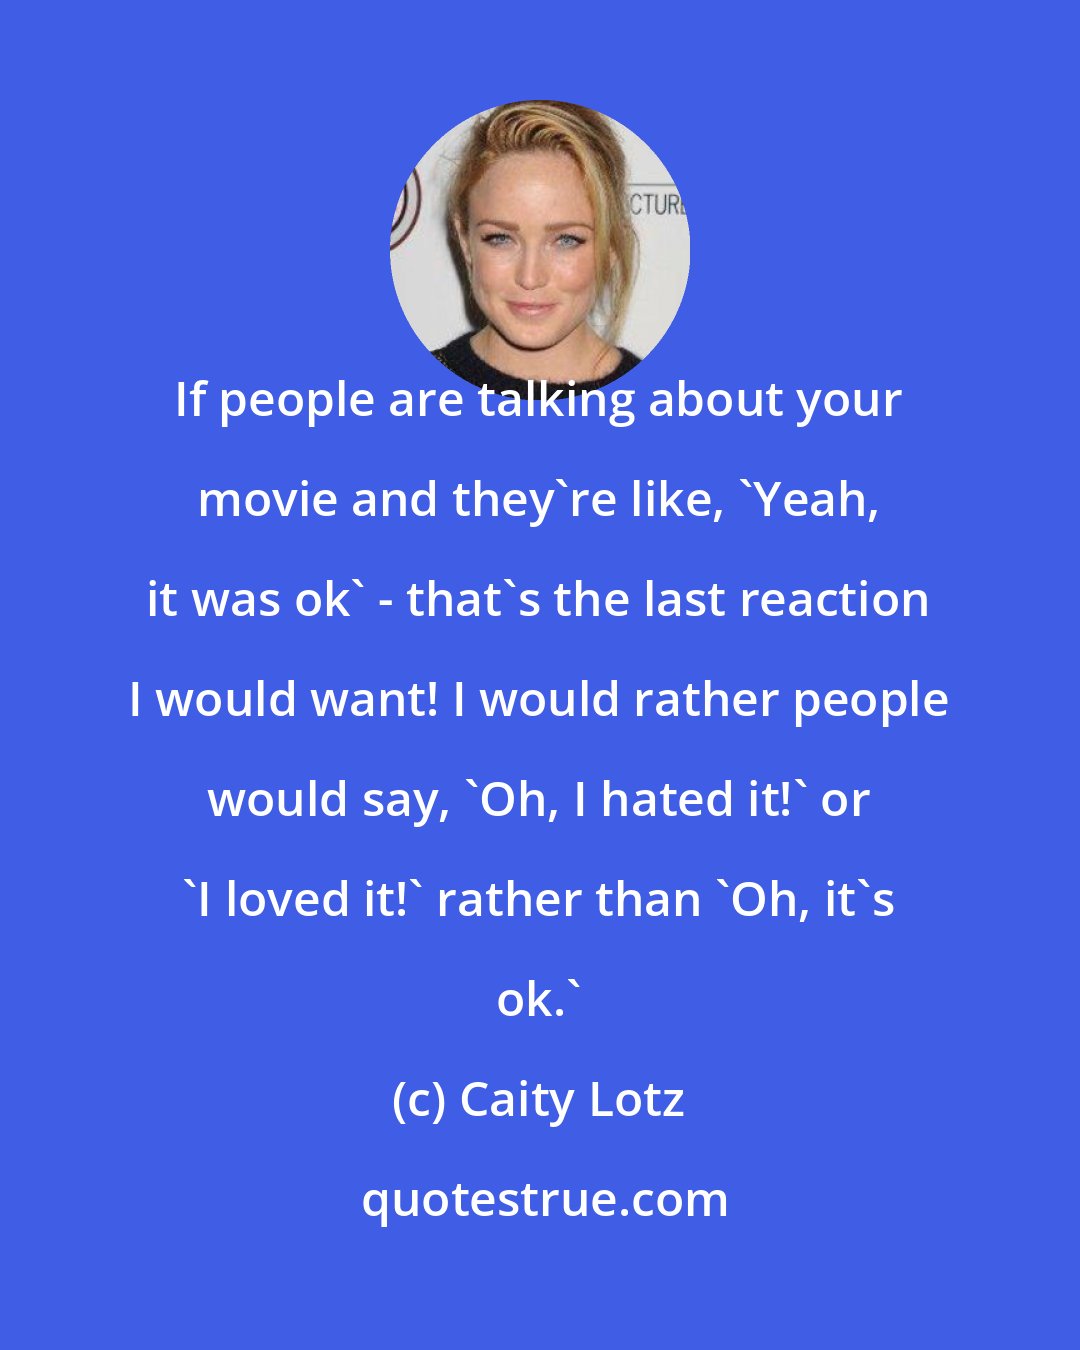 Caity Lotz: If people are talking about your movie and they're like, 'Yeah, it was ok' - that's the last reaction I would want! I would rather people would say, 'Oh, I hated it!' or 'I loved it!' rather than 'Oh, it's ok.'